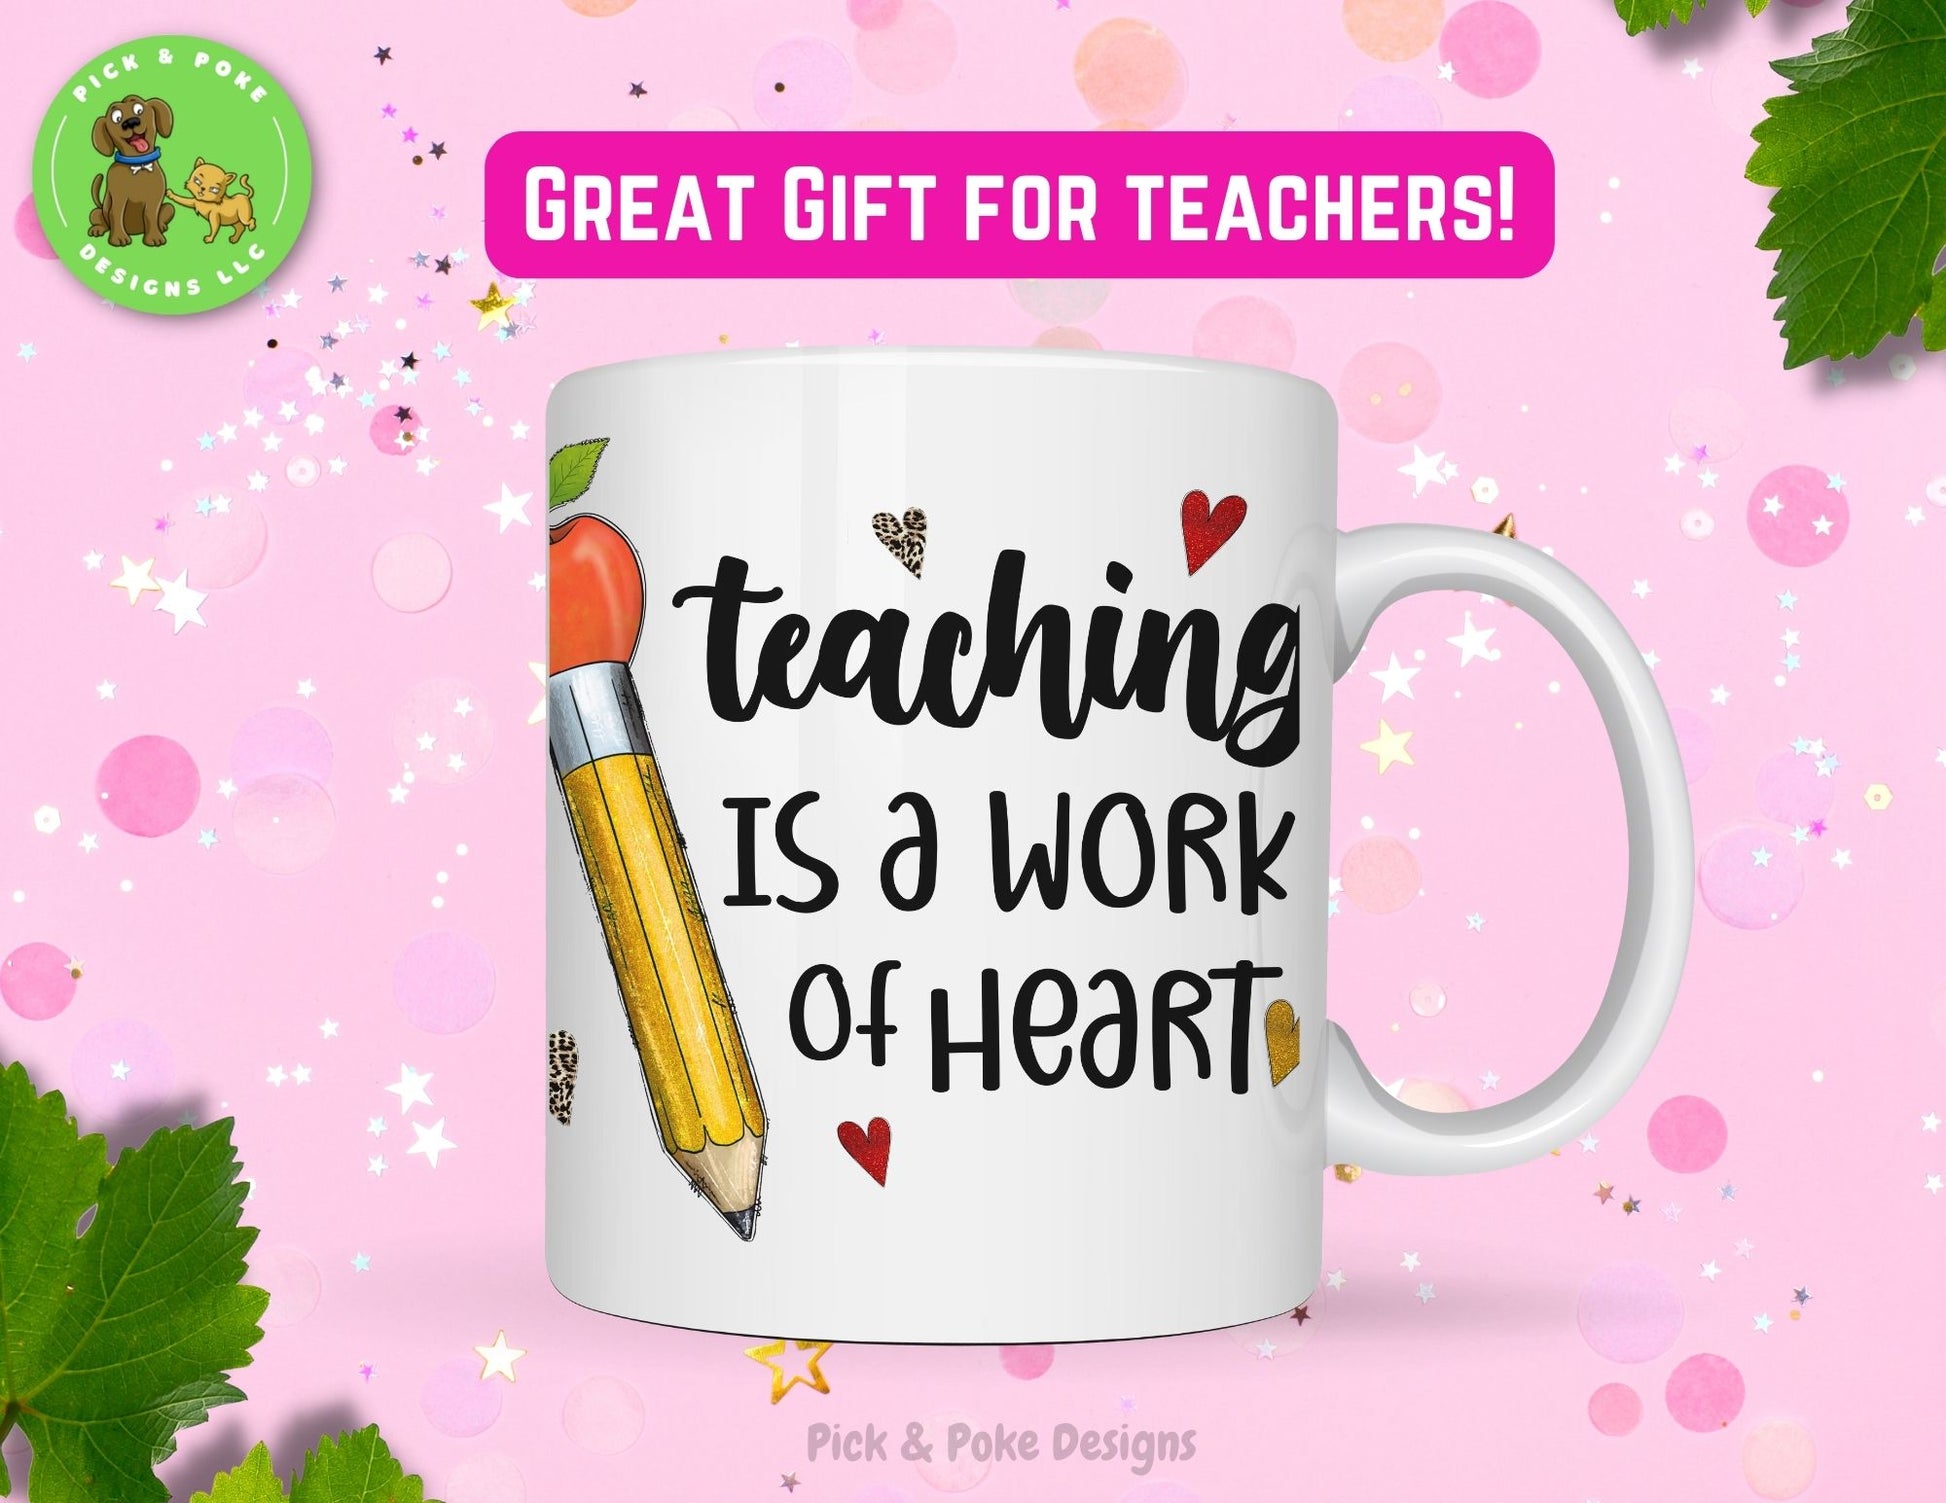 Teaching is a work of heart mug is a great gift for teachers